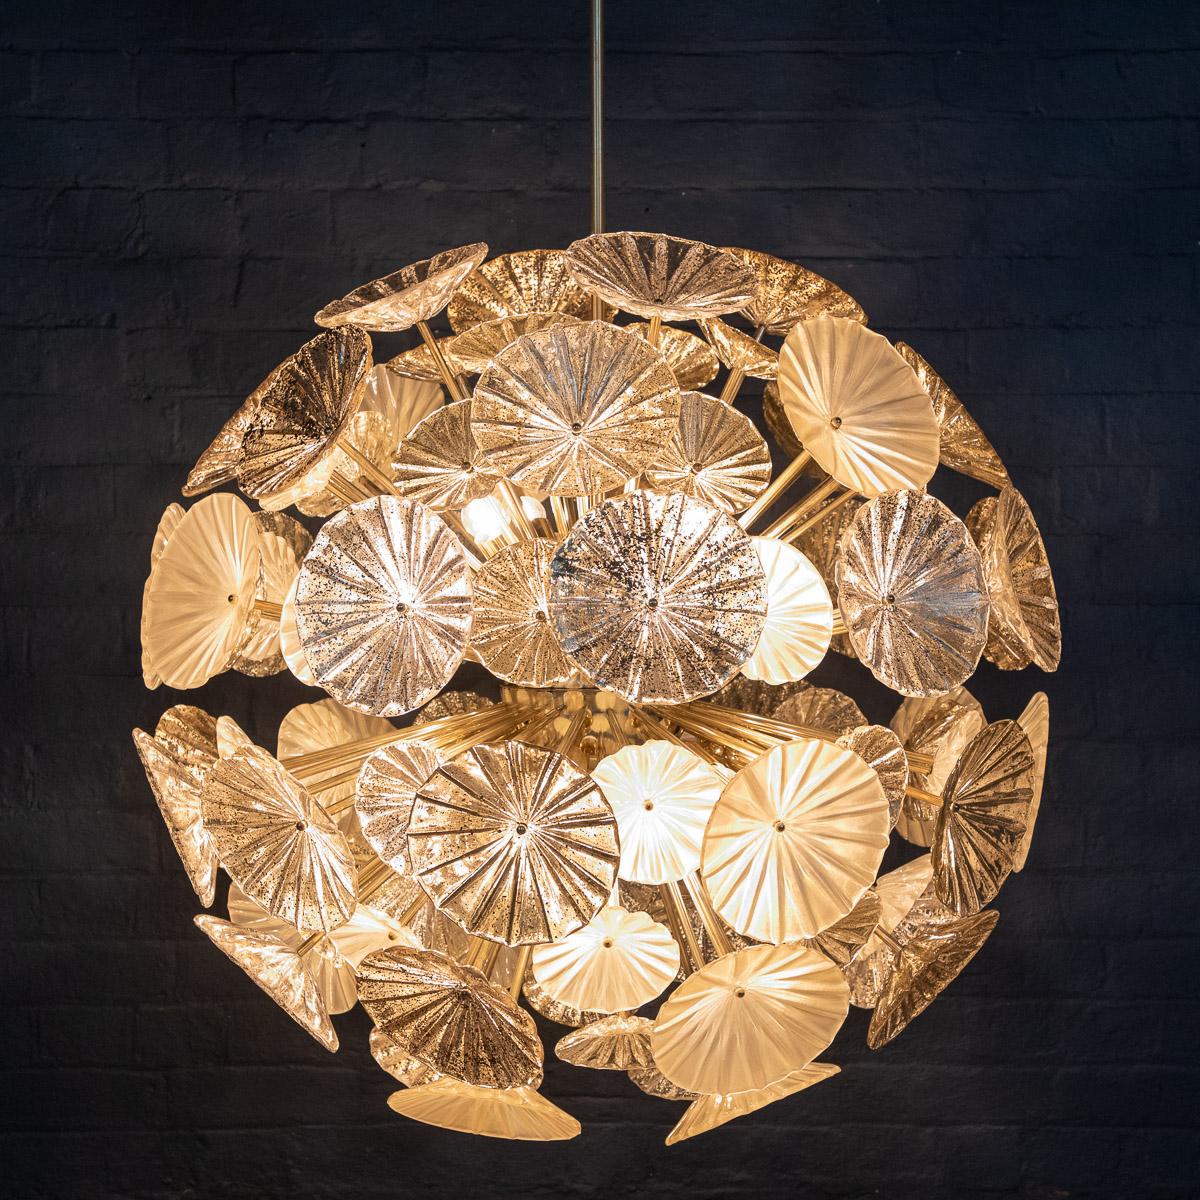 Very large Venetian handmade chandelier, inspired by 1950s “Sputnik“ models, made with glass daffodil shaped glass in opaline and clear glass with silver and gold leaf flecks, made in a very limited number in Venice, Italy. 110 brass rods supporting